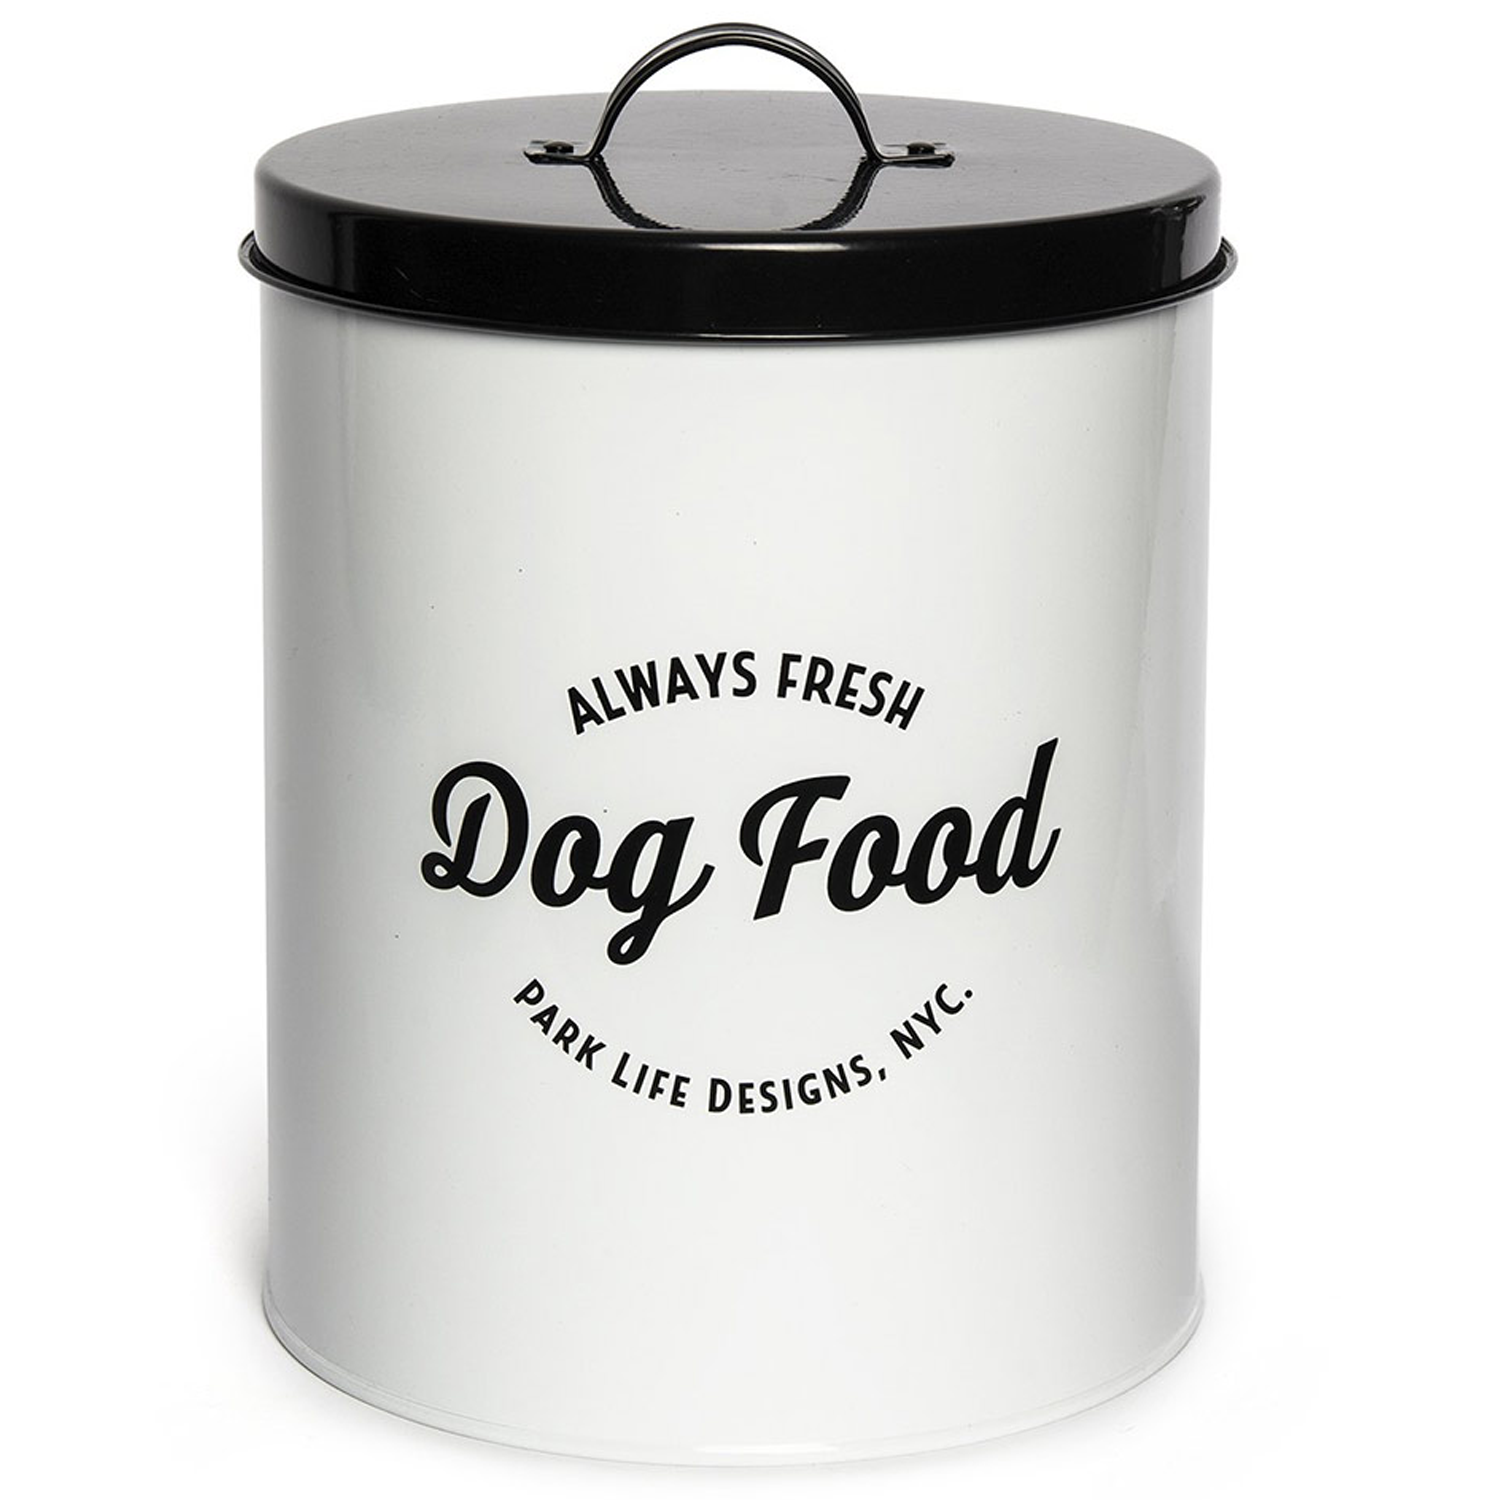 Pet Boutique - Dog Dining - Wallace Dog Food Canister by Park Life Designs